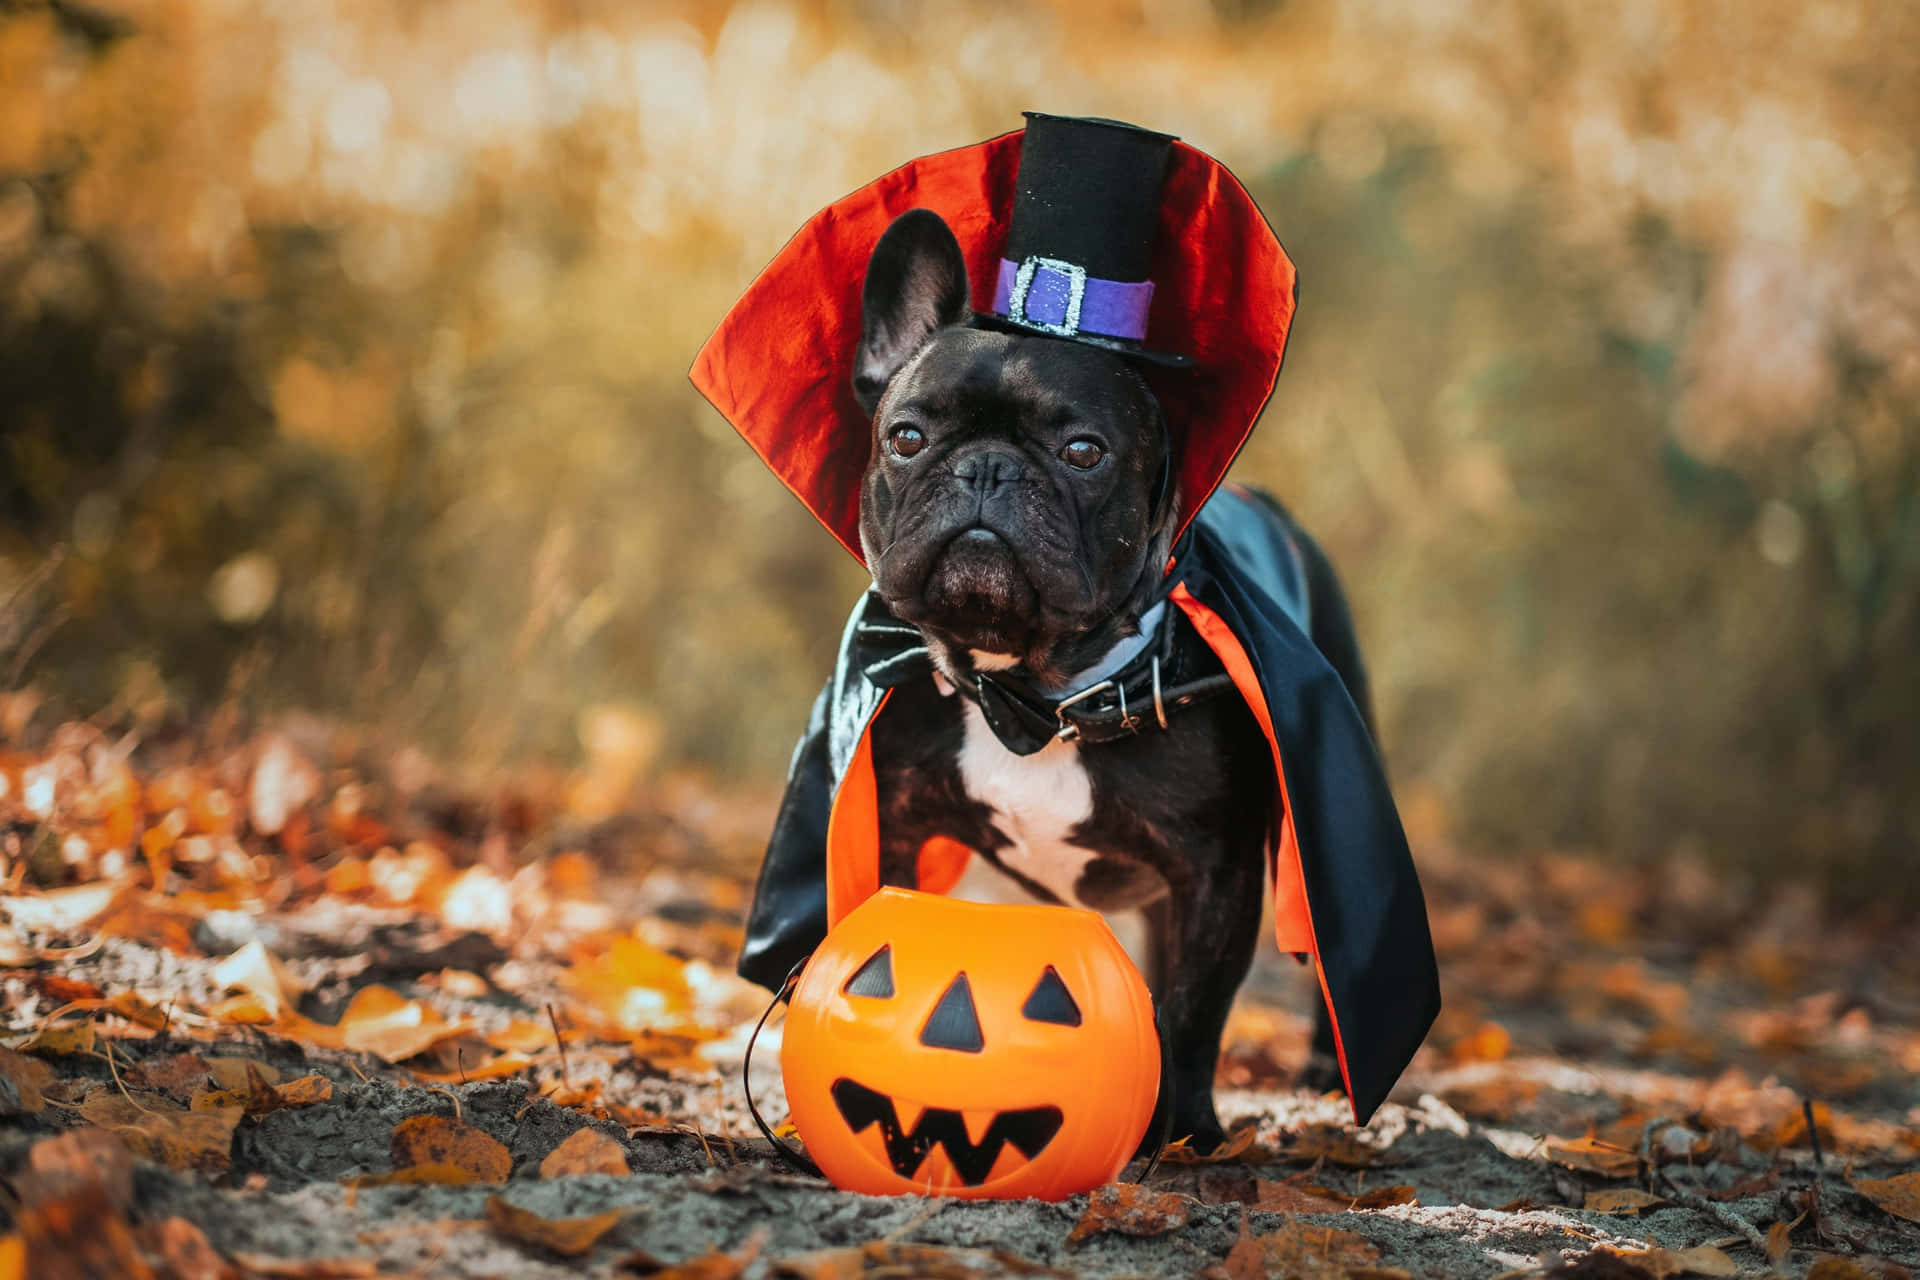 Dress Up Your Furry Friend - Get Your Pet in the Spirit of Halloween with a Costume Wallpaper